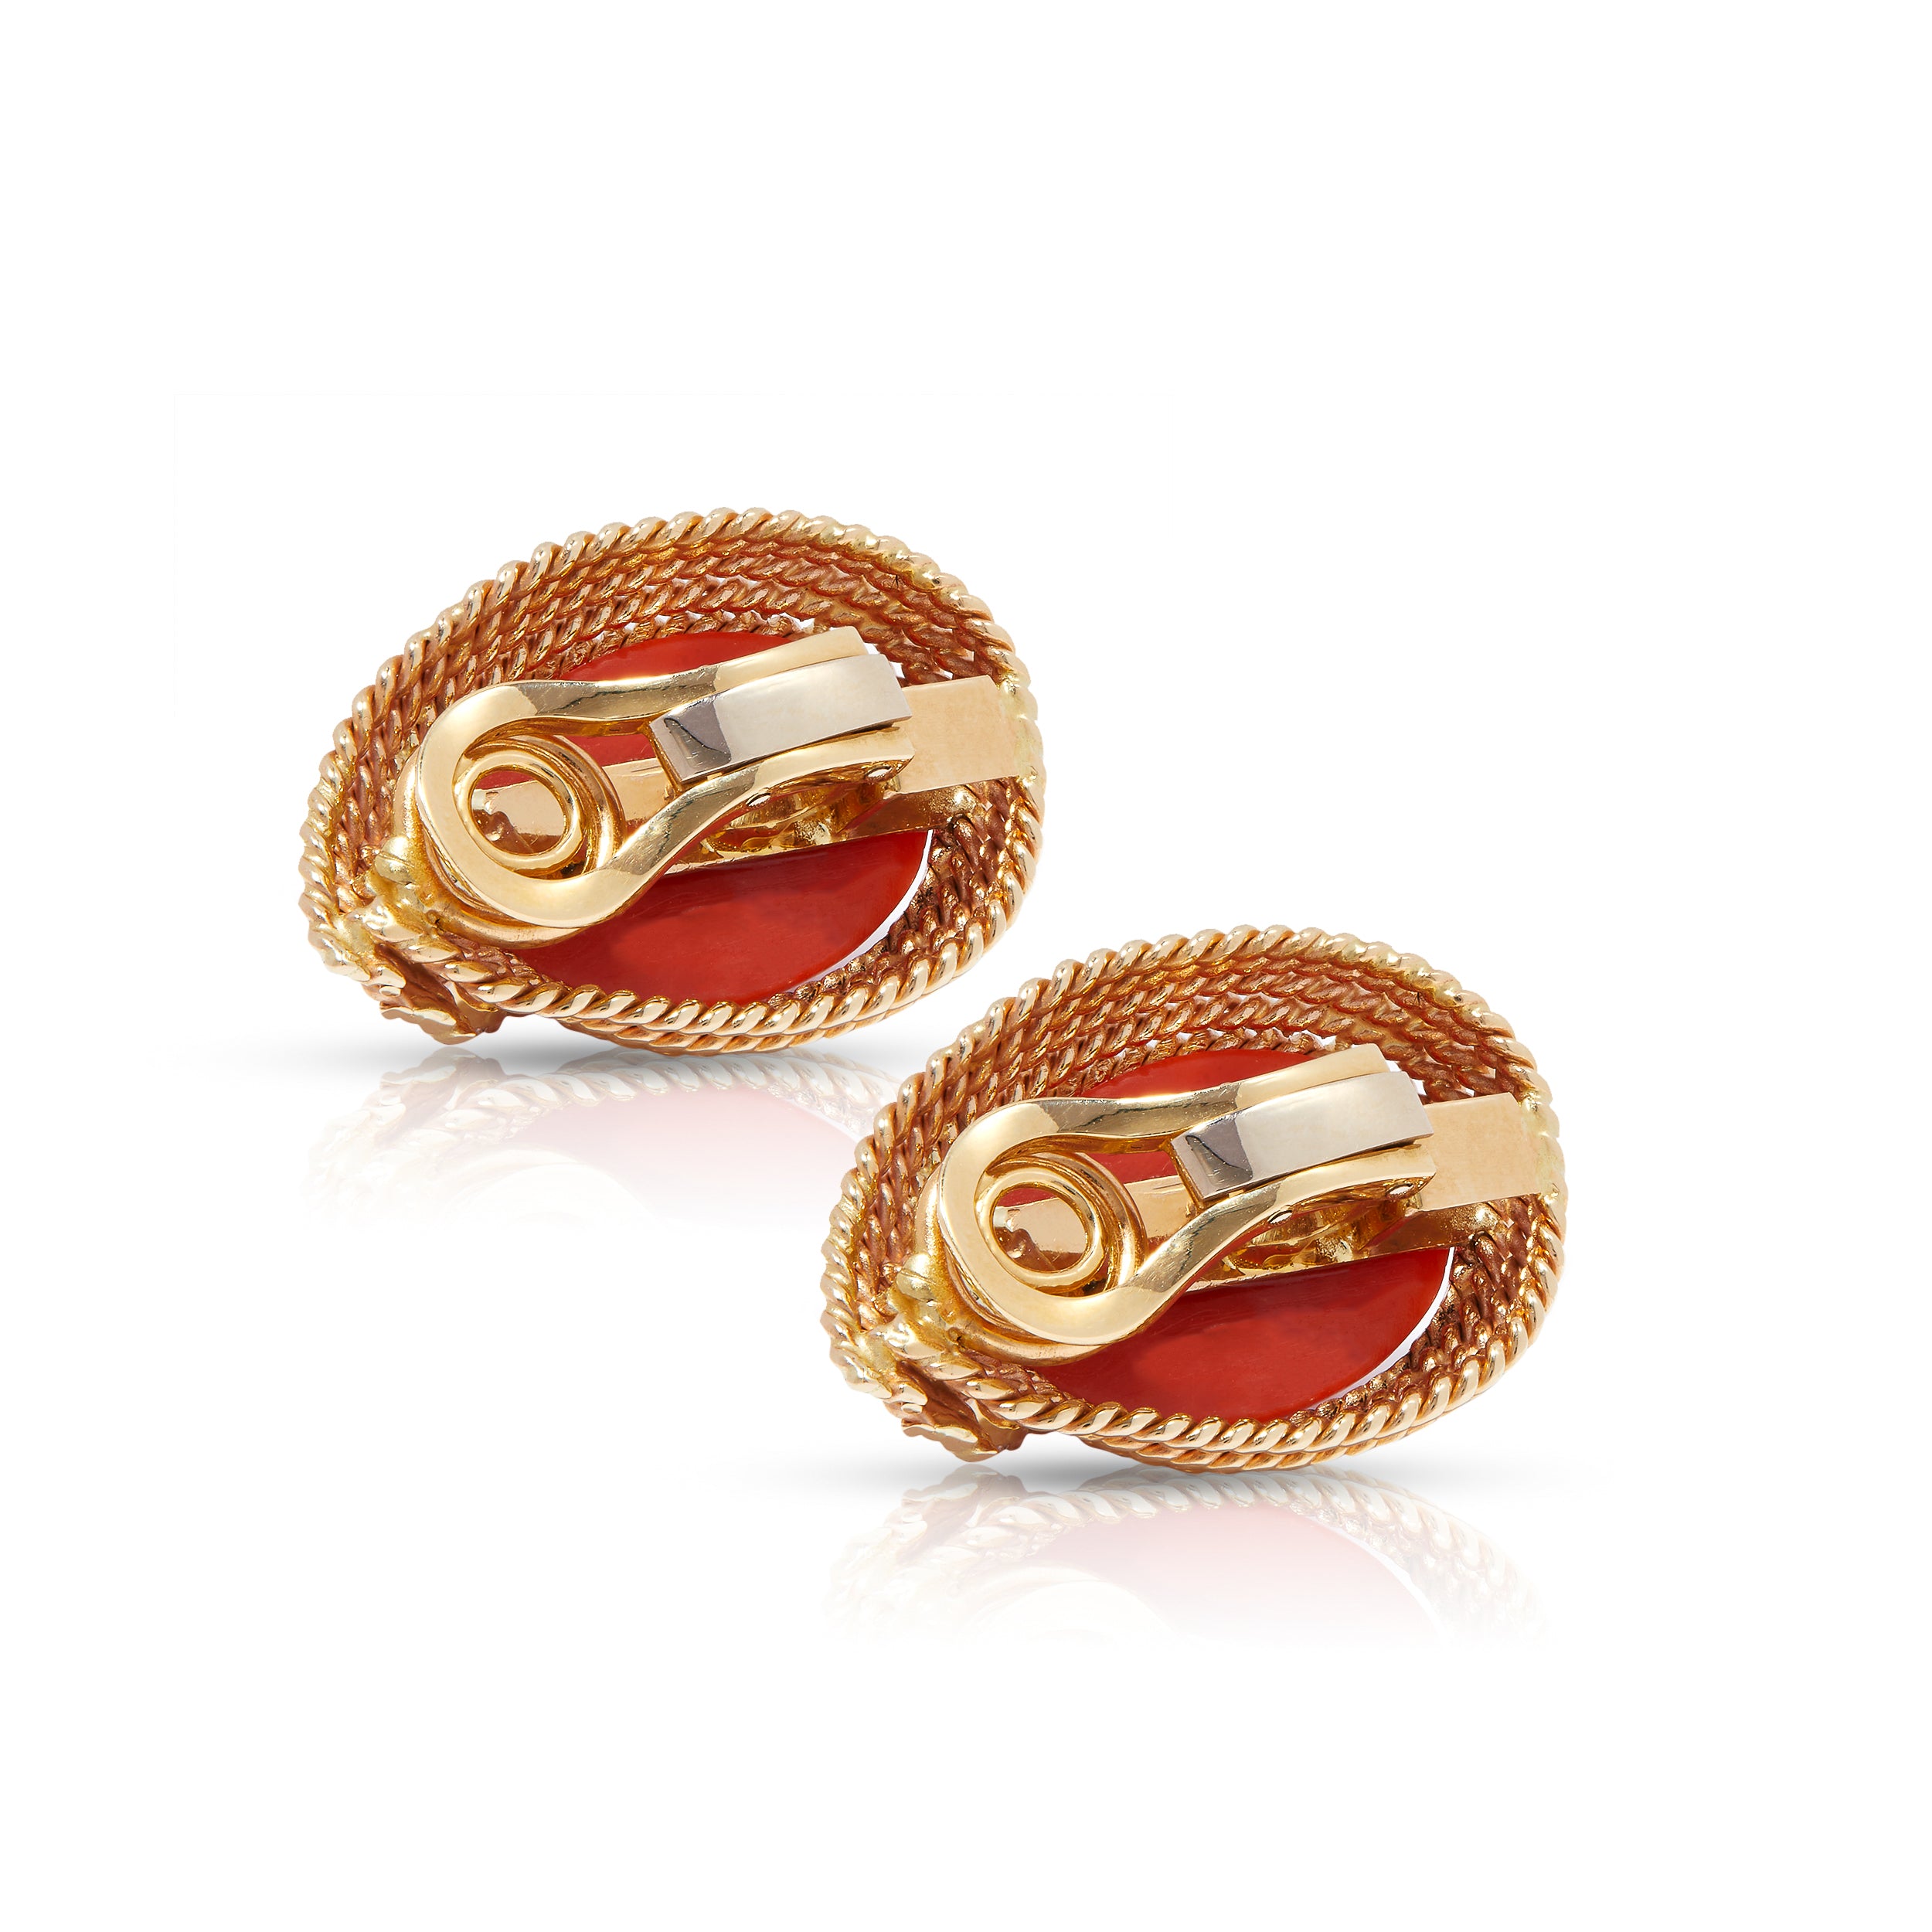 Clip-on closure side of pre-owned designer earrings with gold and corals